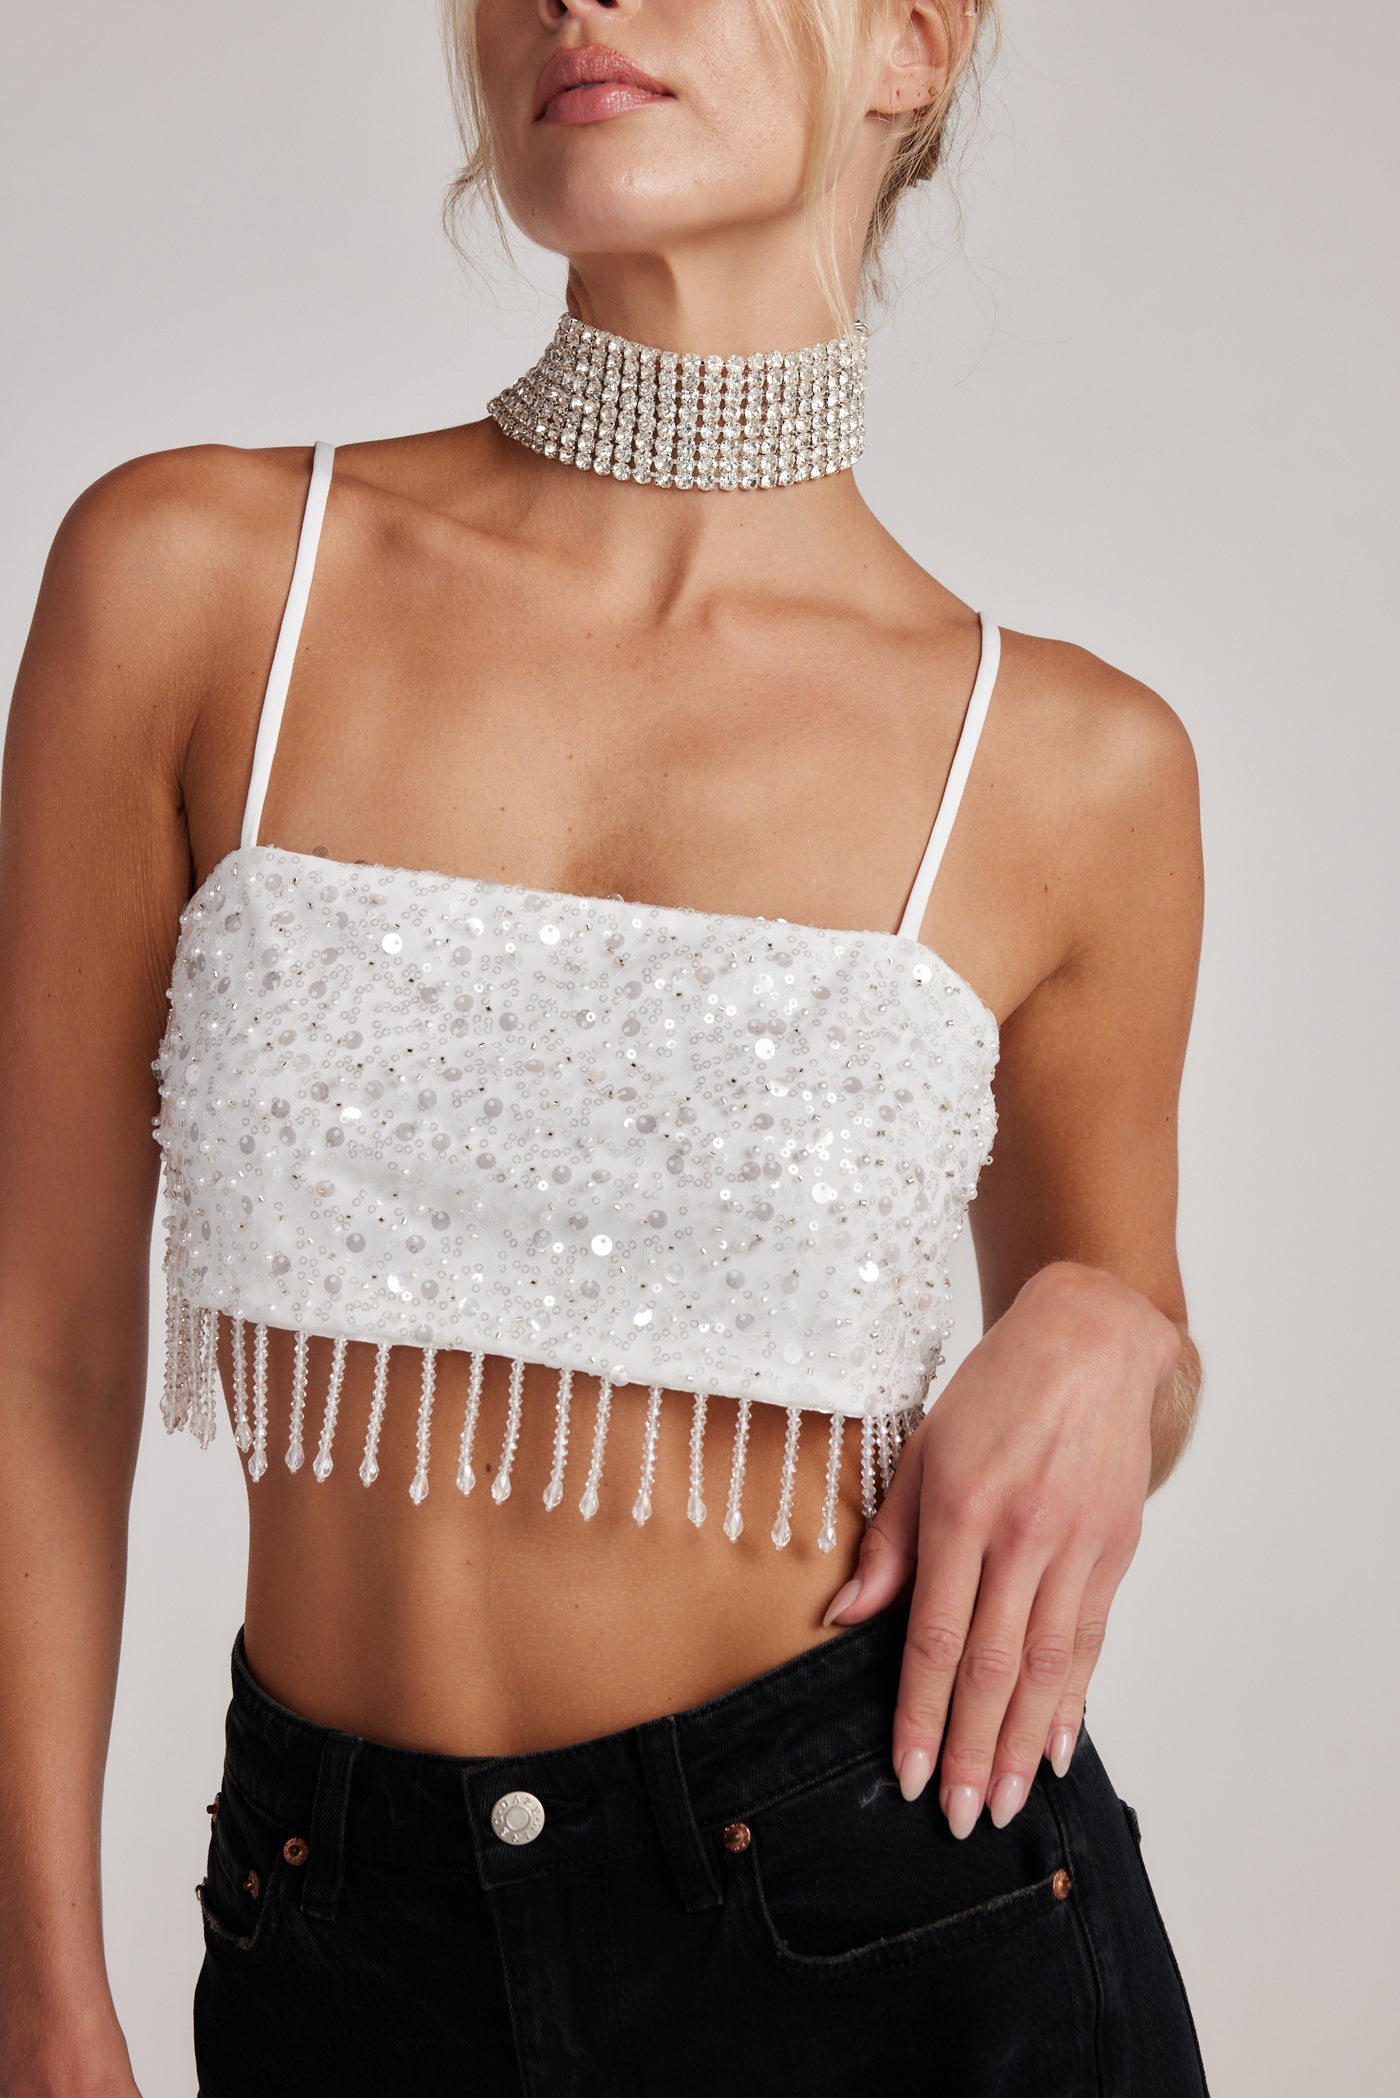 Gatsby White Fringe Strapless Top - L Size - Women's Tops - 12th Tribe